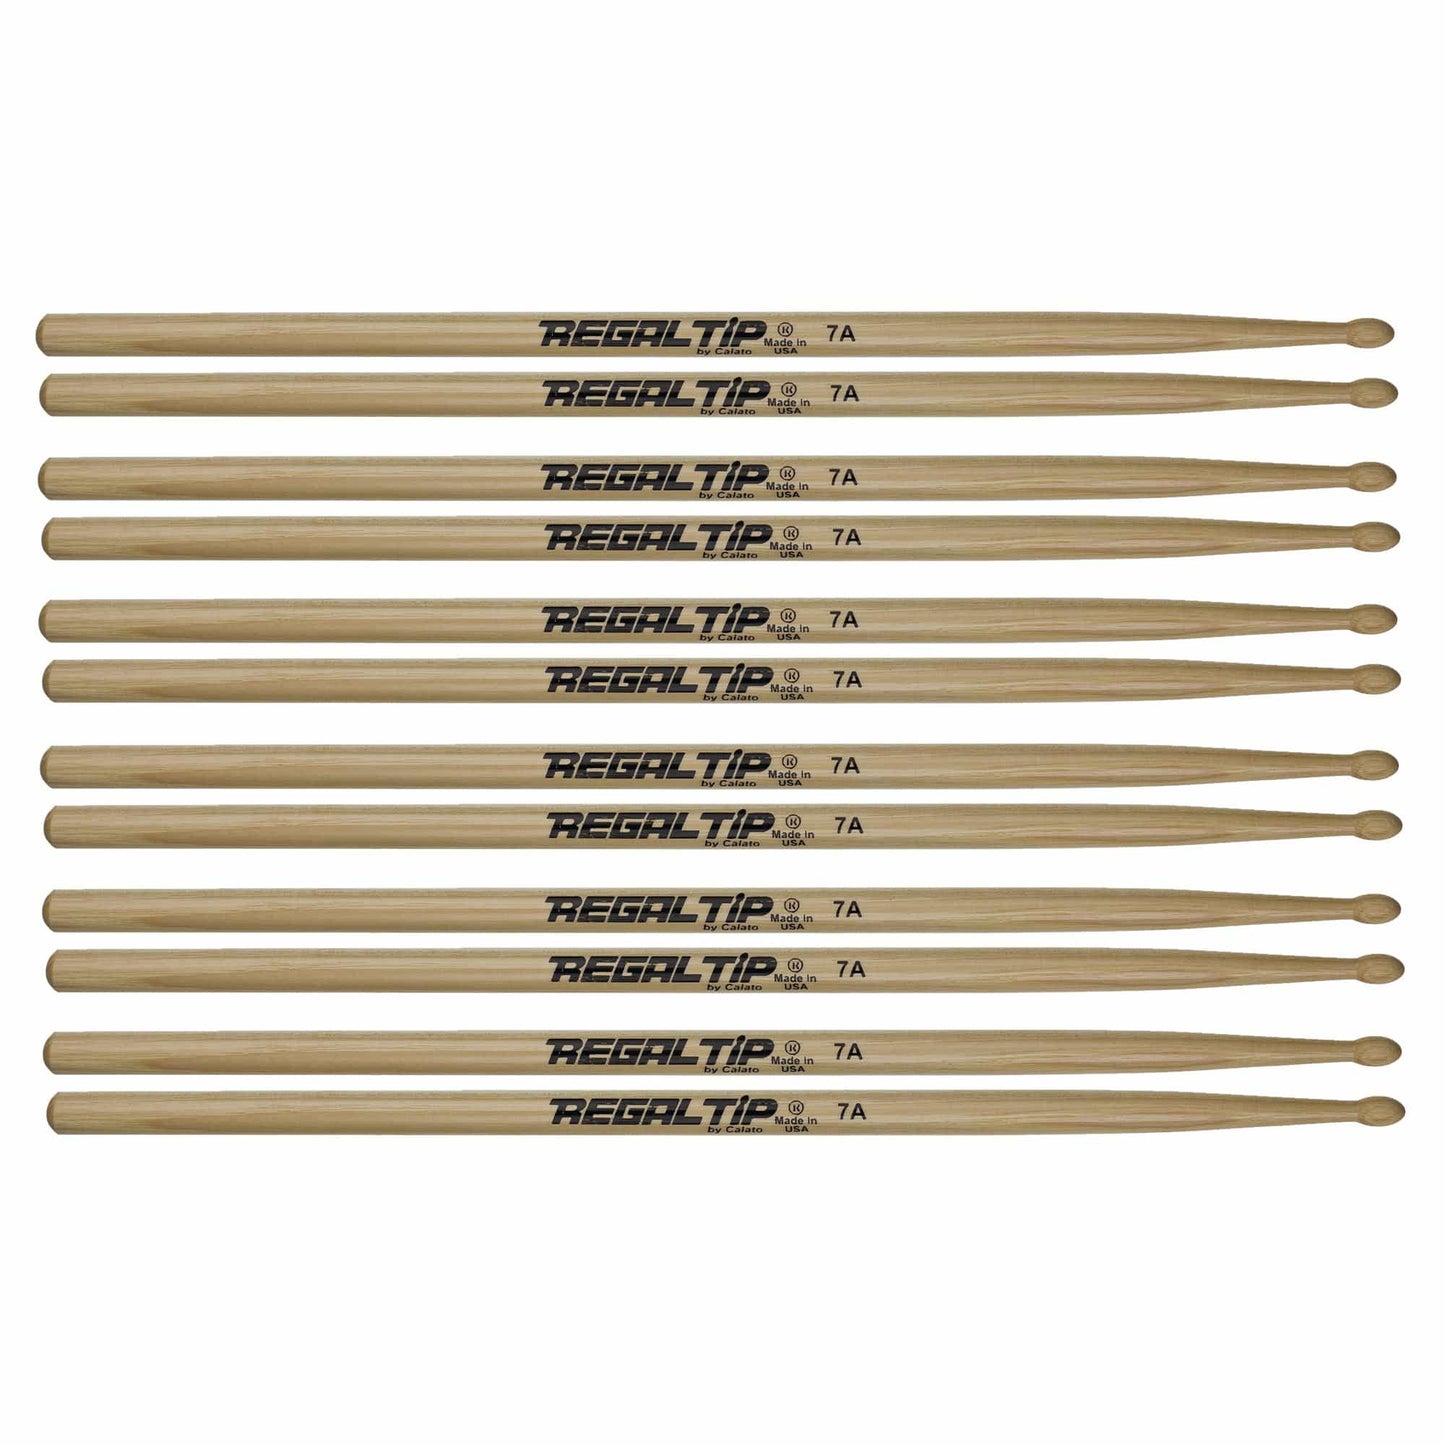 Regal Tip 7A Hickory Wood Tip Drum Sticks (6 Pair Bundle) Drums and Percussion / Parts and Accessories / Drum Sticks and Mallets